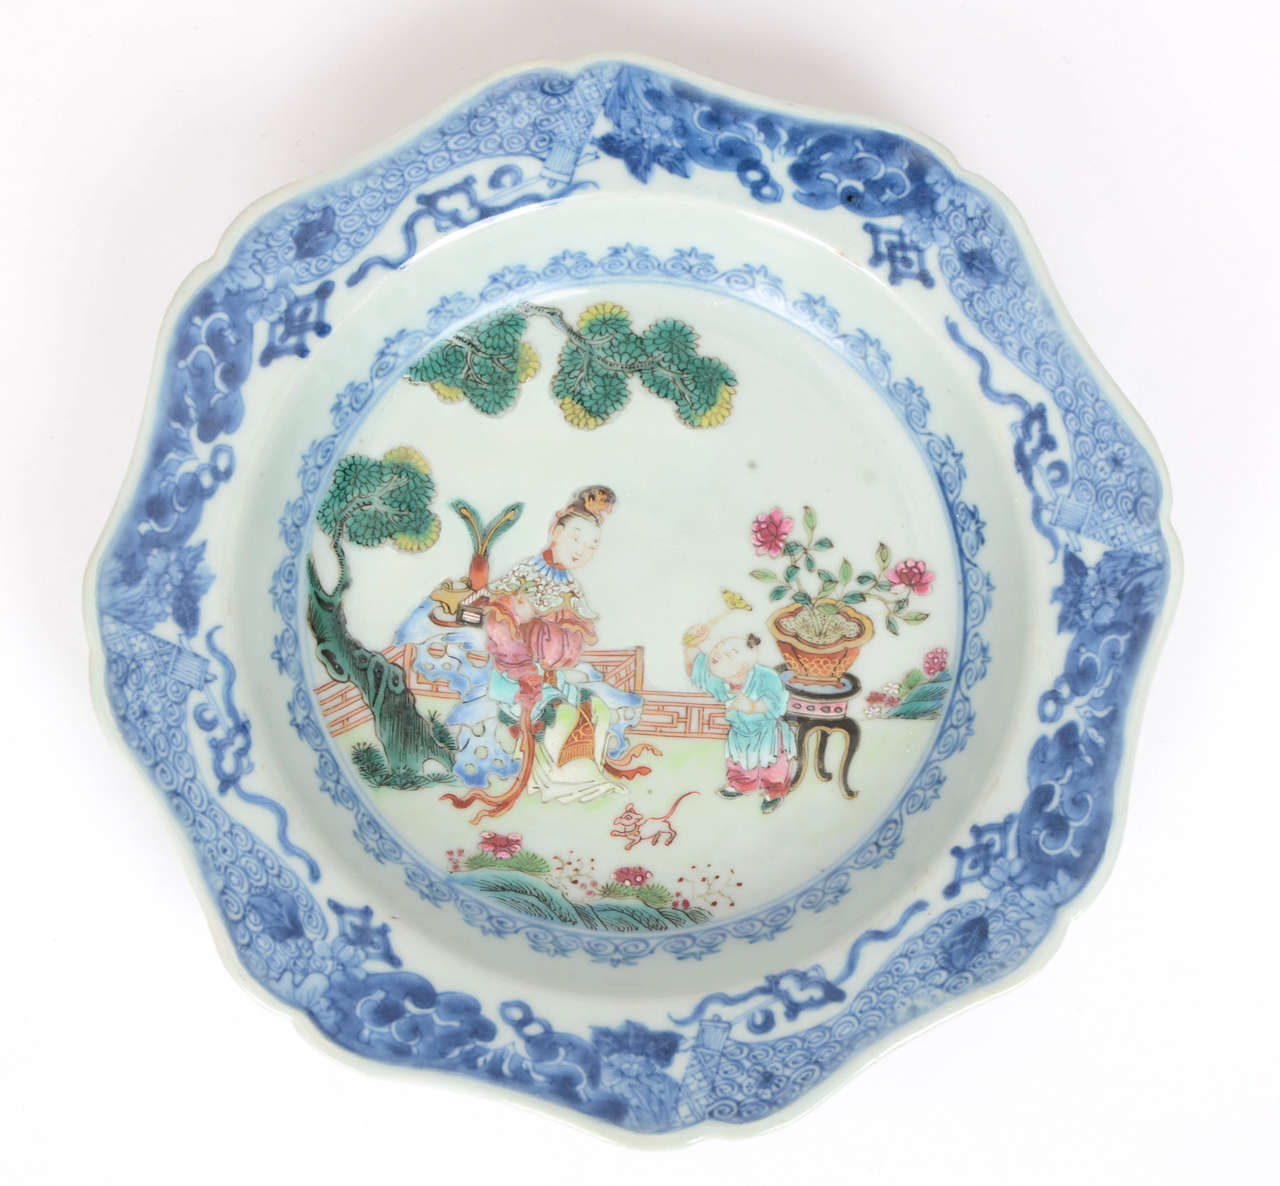 This is a superb quality Chinese porcelain bowl from the Qing dynasty, Kangxi period, circa 1662-1722.

The bowl has a shaped curved octagonal edge with an underglaze blue multiple border design of clouds, lozenge and other symbols.

 The